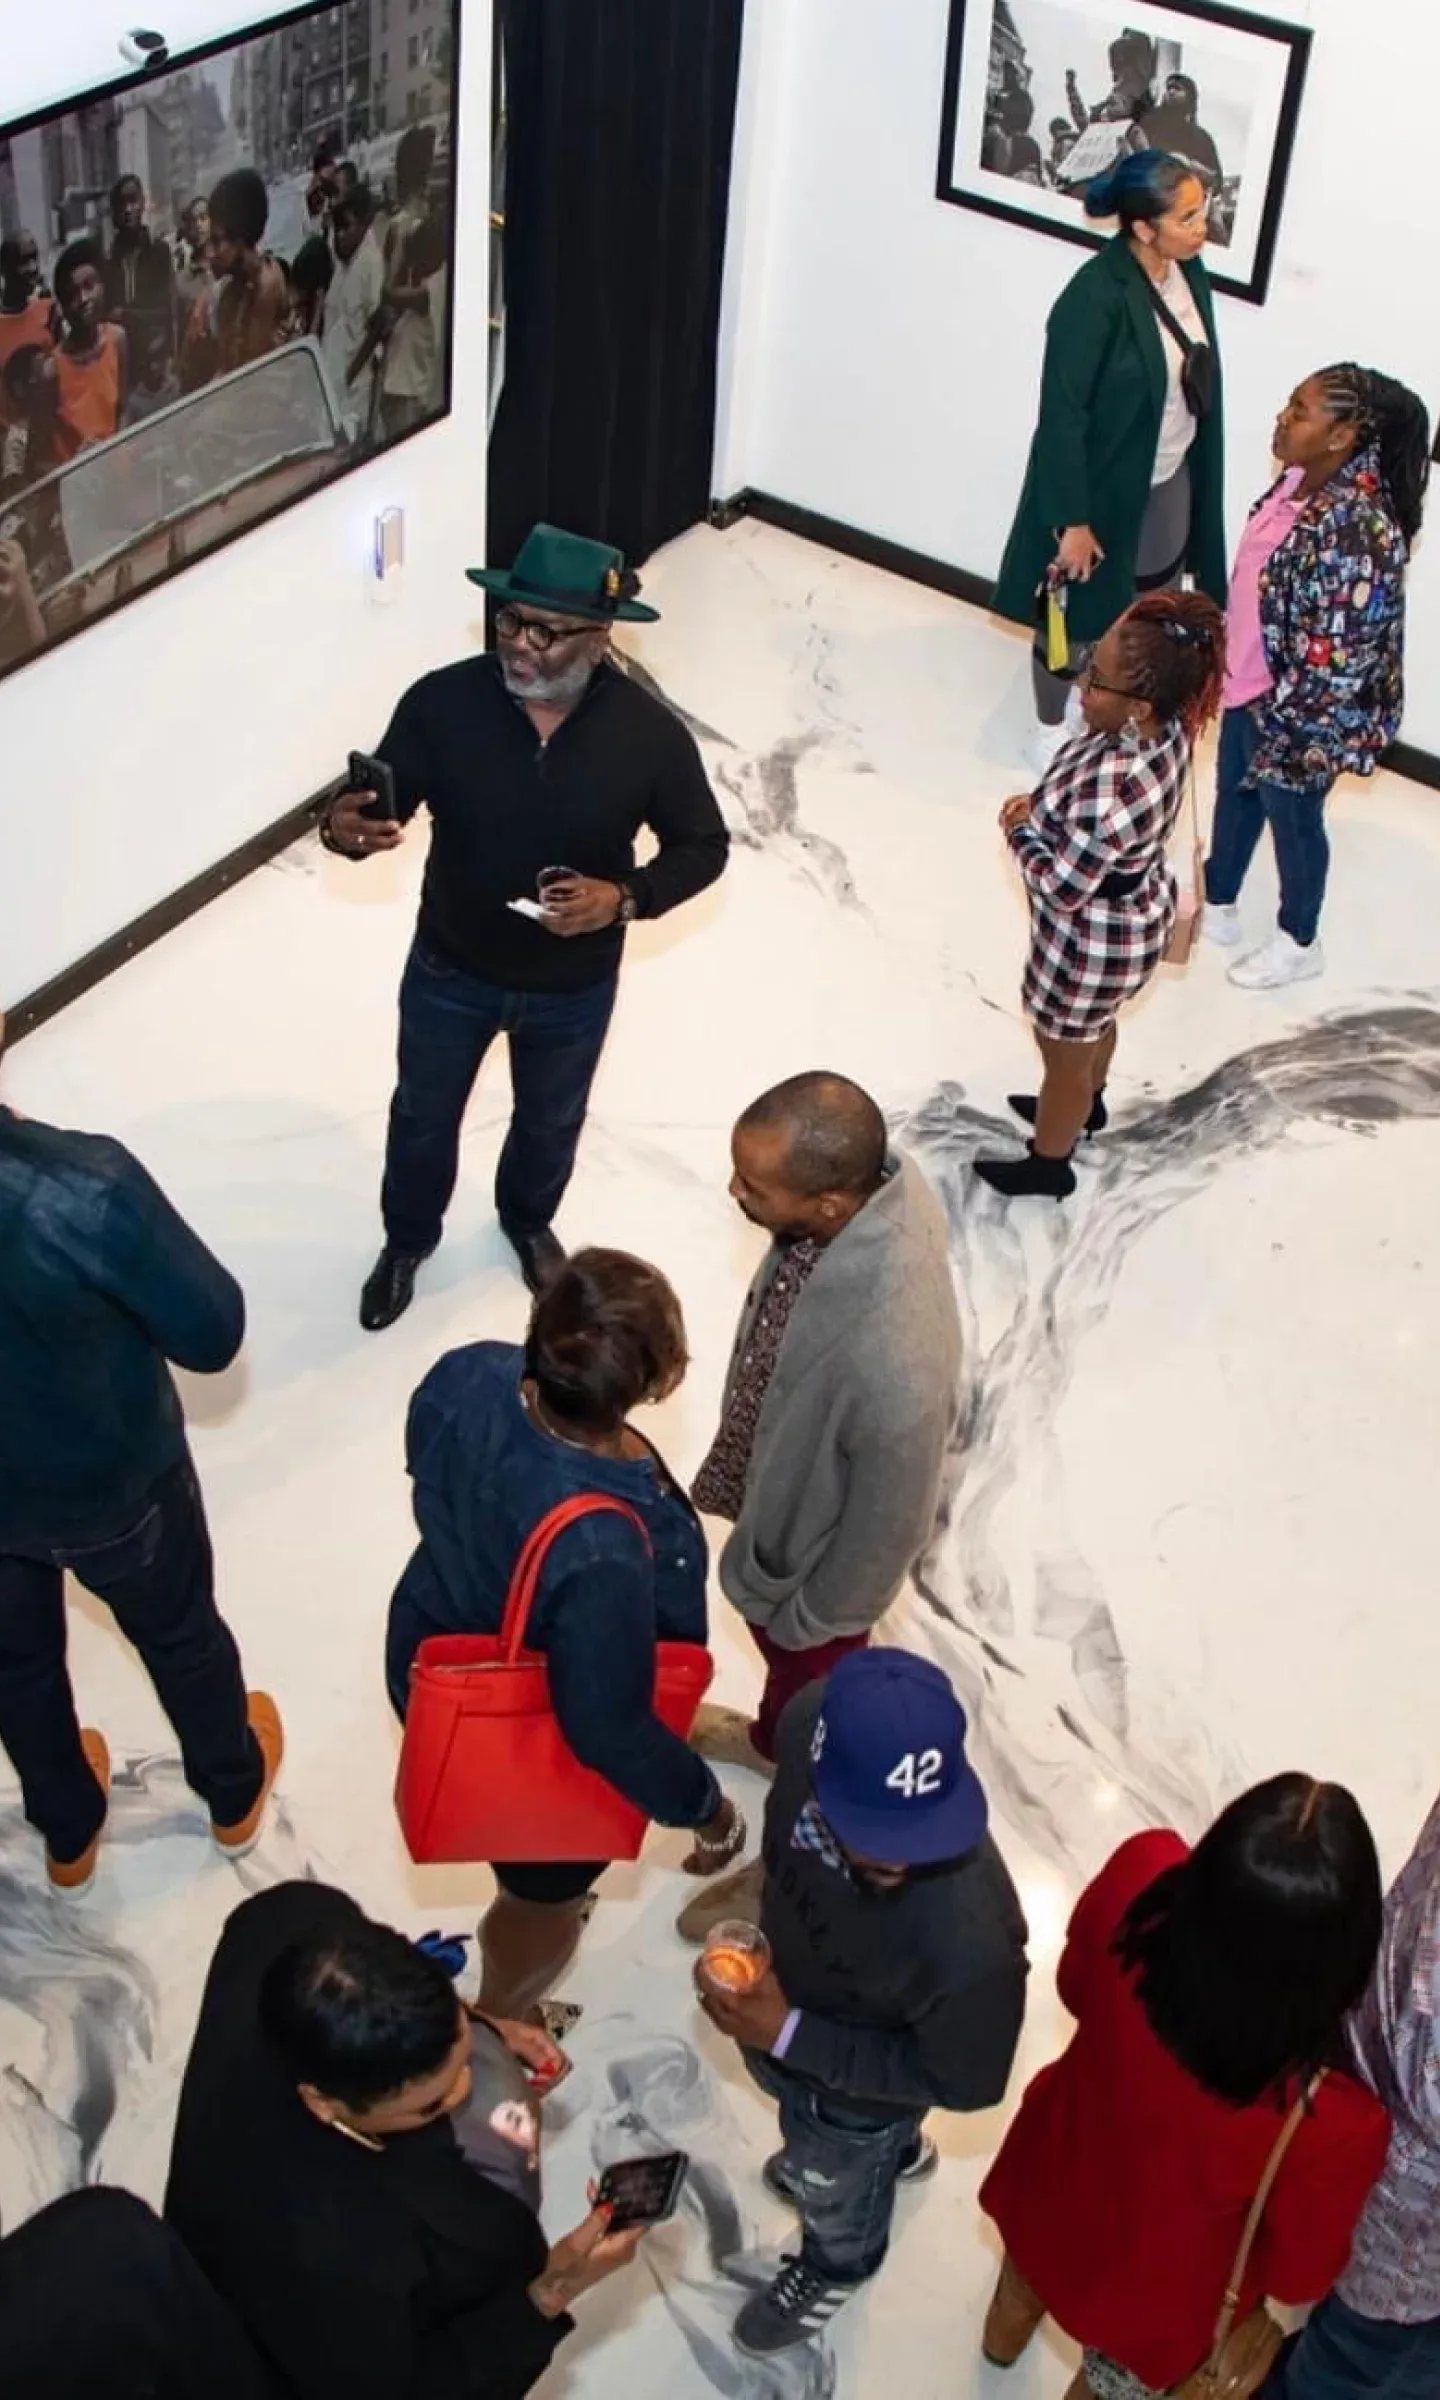 Bird’s-eye view of a group of people standing in an art gallery with framed art hanging on white walls